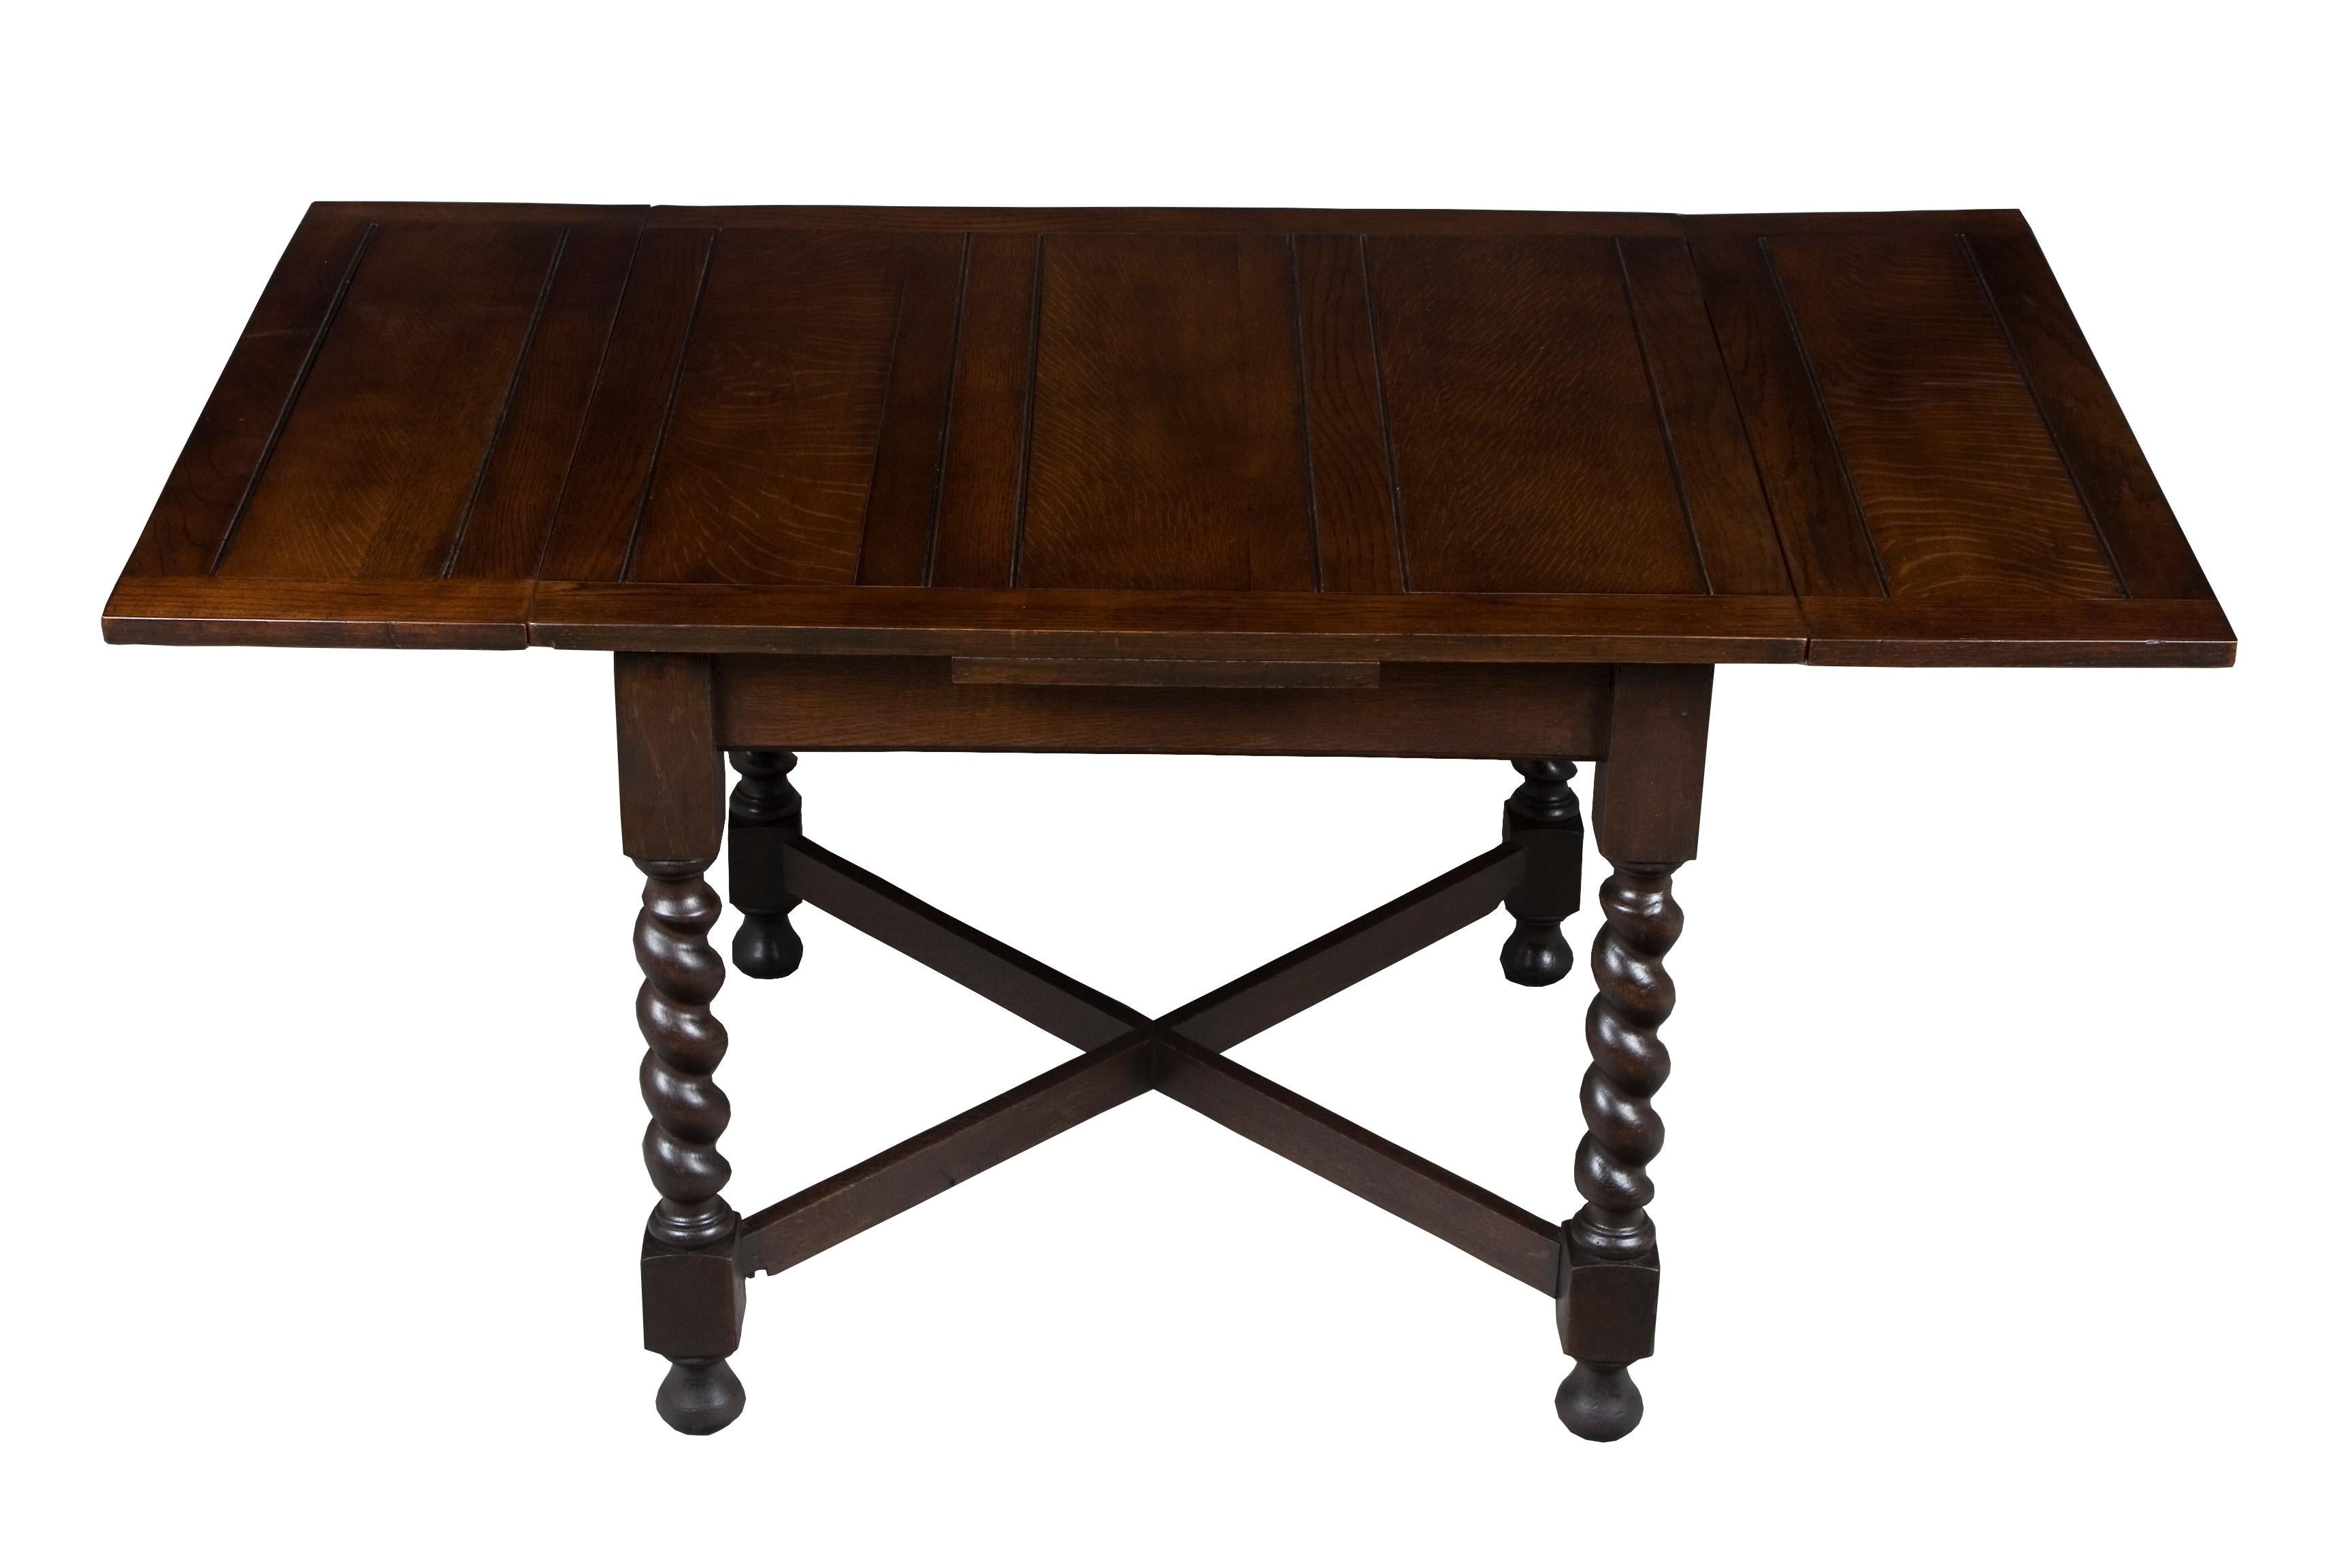 This exquisite dark oak pub table was crafted in England, circa 1920. Over the years, the rich oak has developed a lovely patina, which has helped flesh out the natural beauty of the wood. As a result, the oak displays a distinguished complexion and